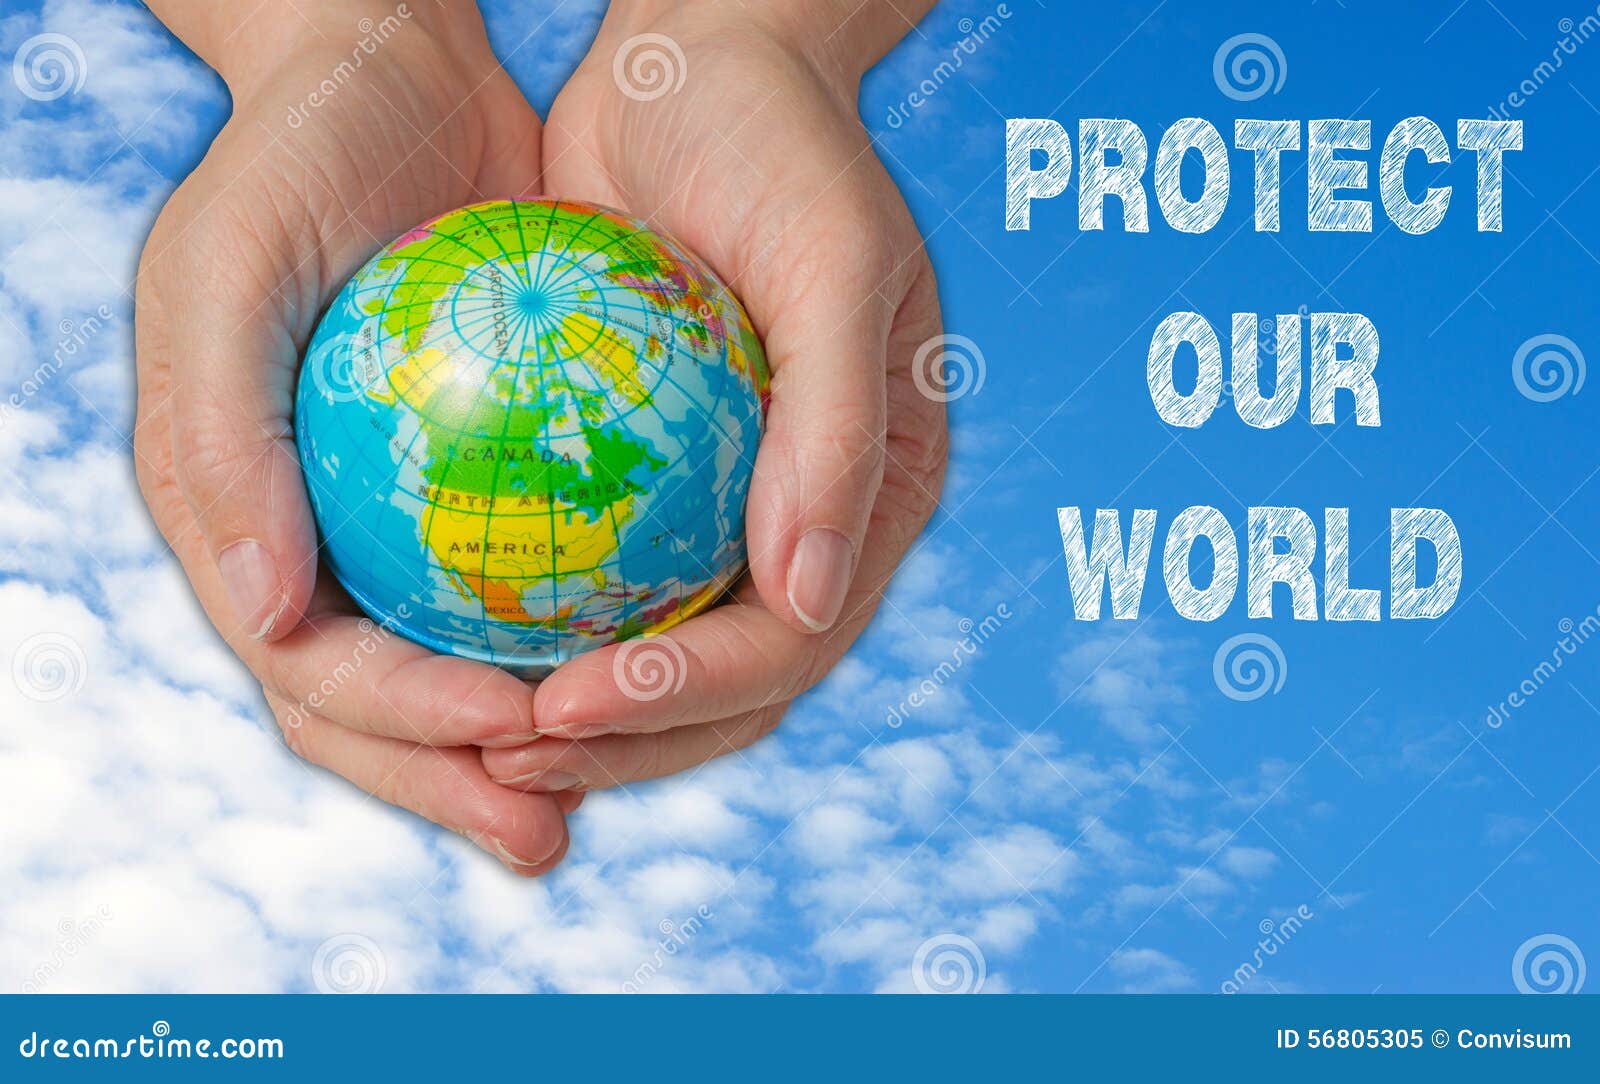 protect our world